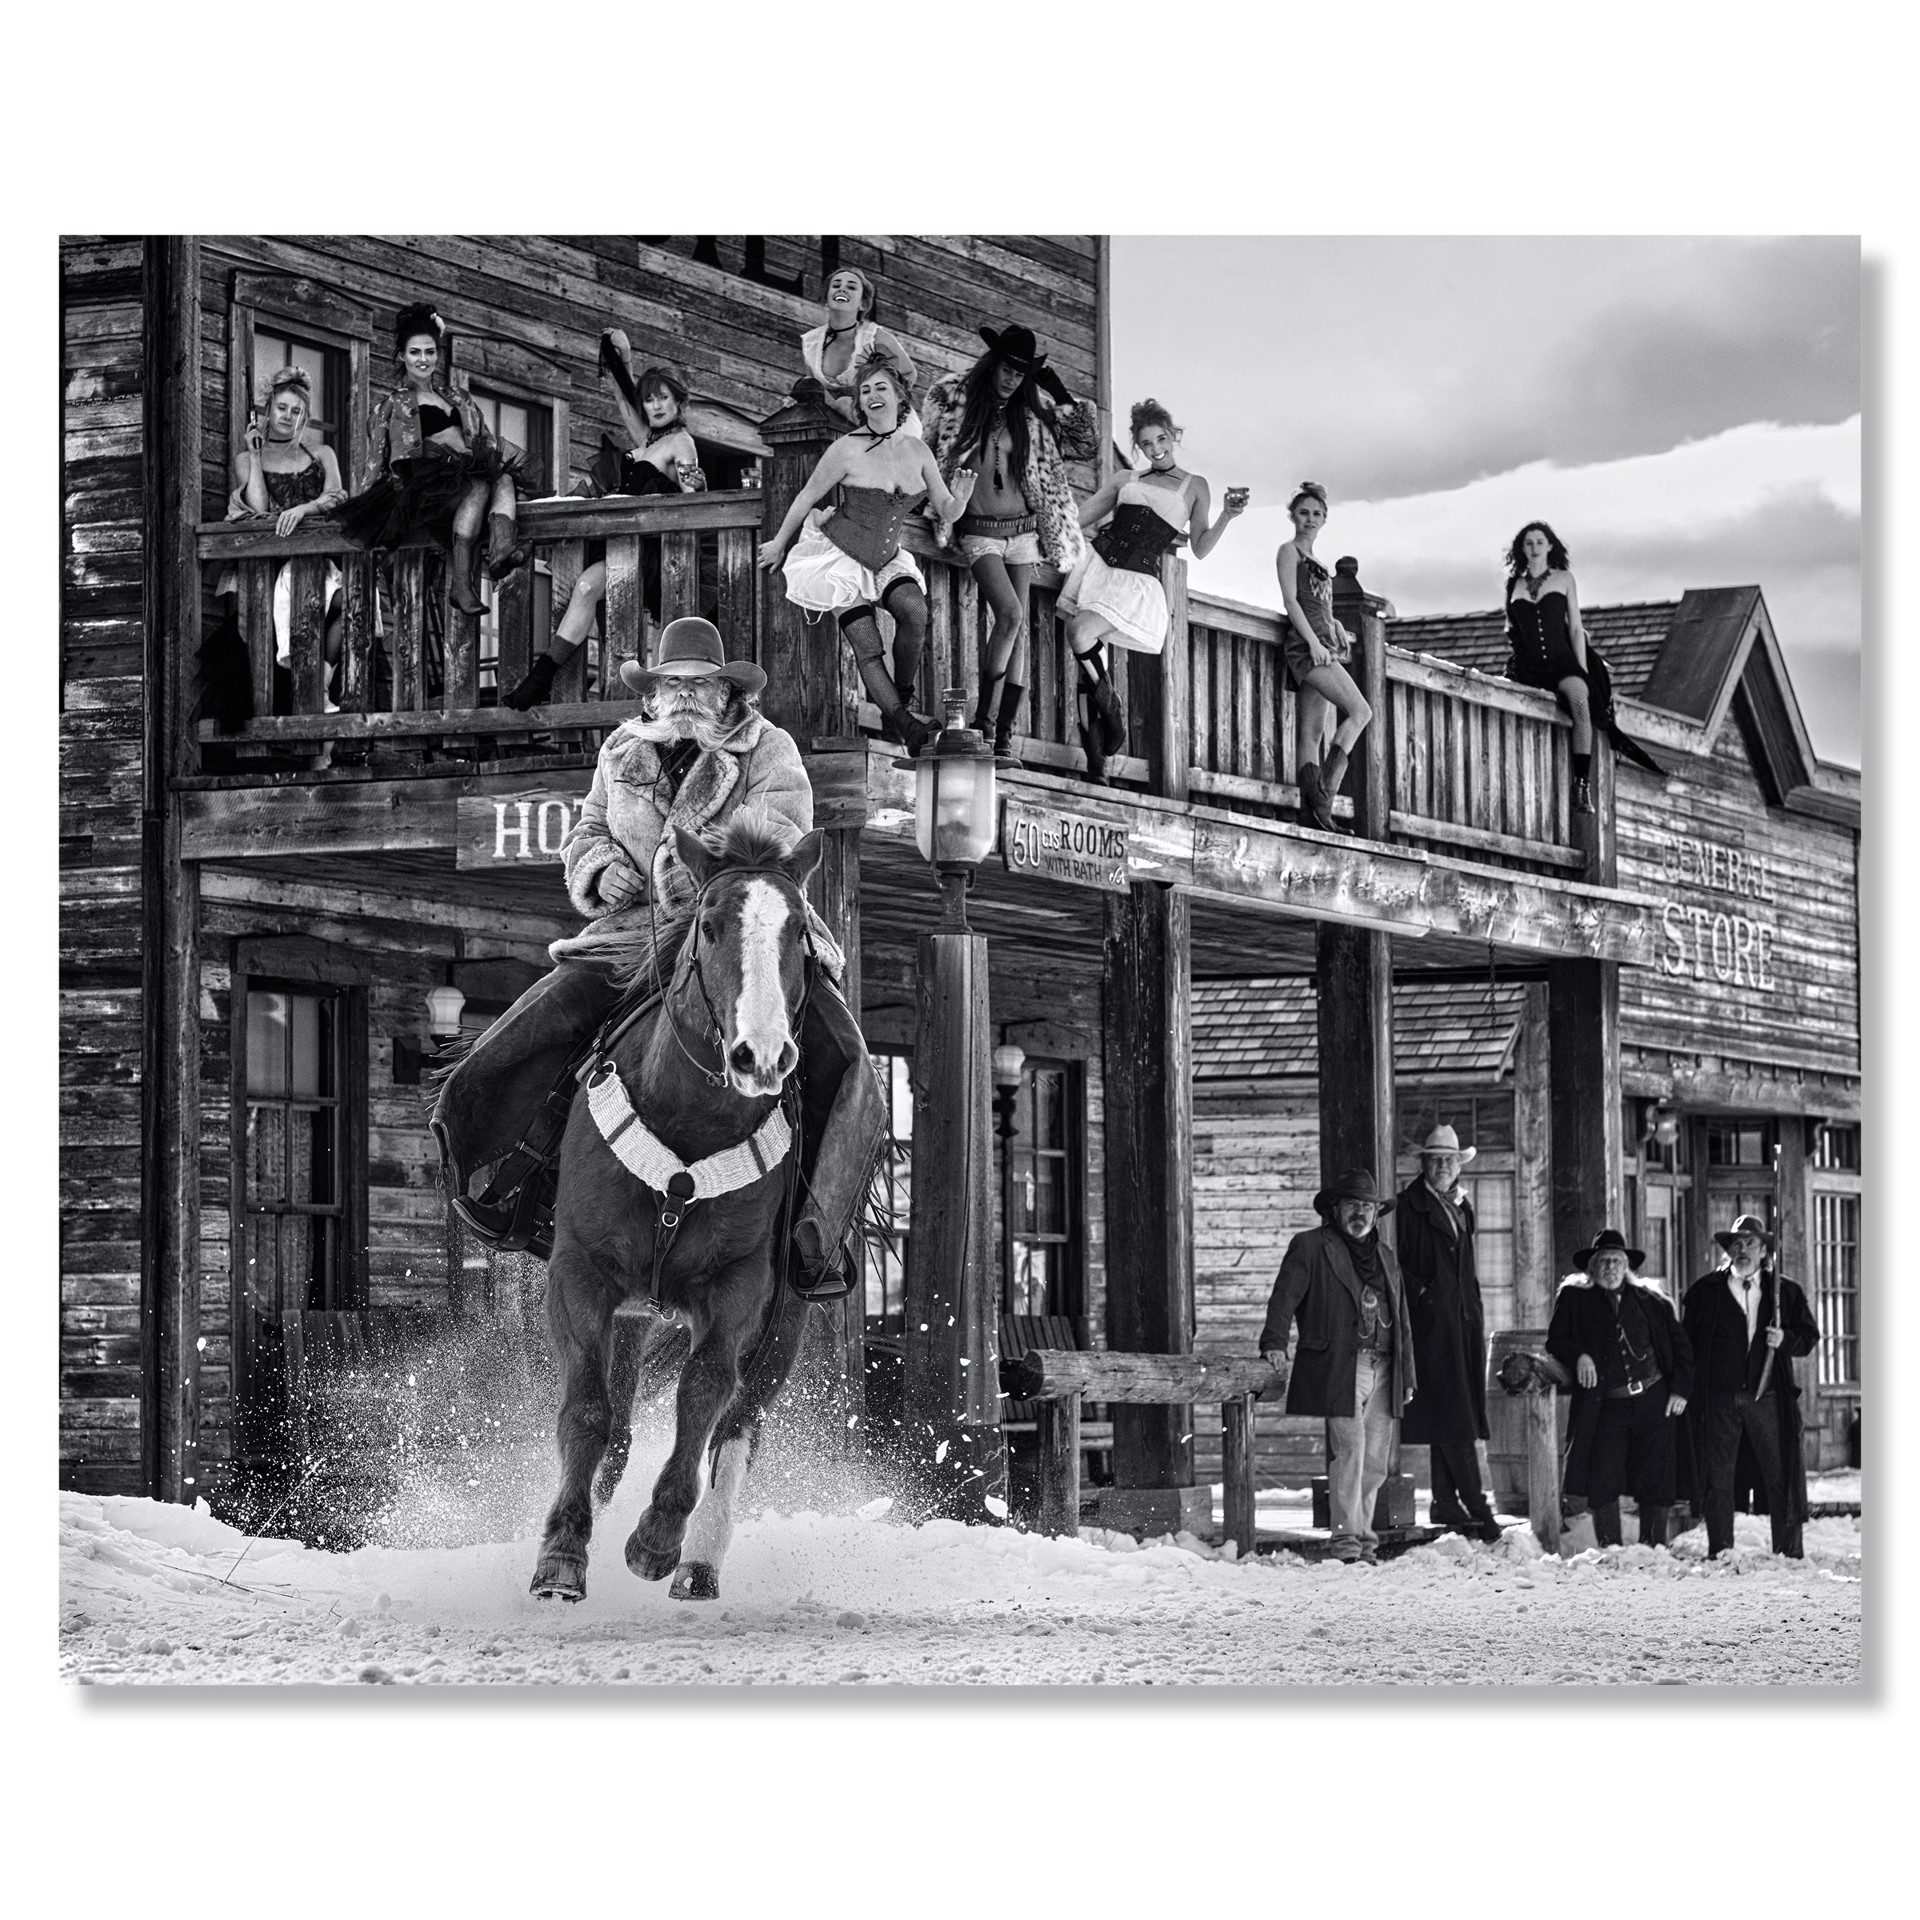 Mama Don't Let your Children Grow up to be Cowboy by David Yarrow